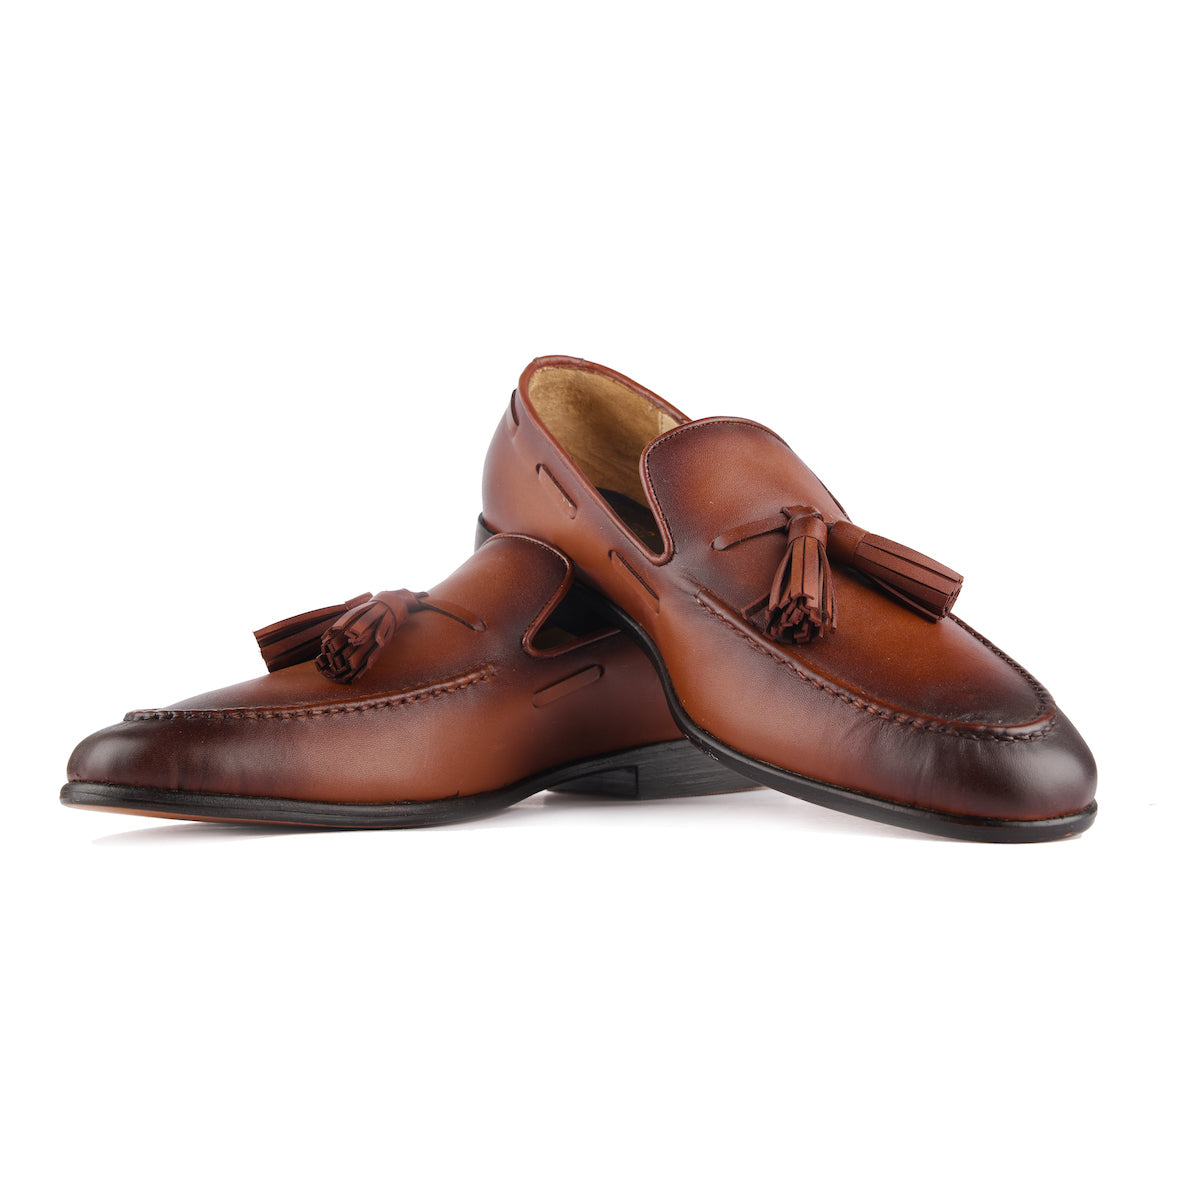 Bari Two Toned Loafers For Men